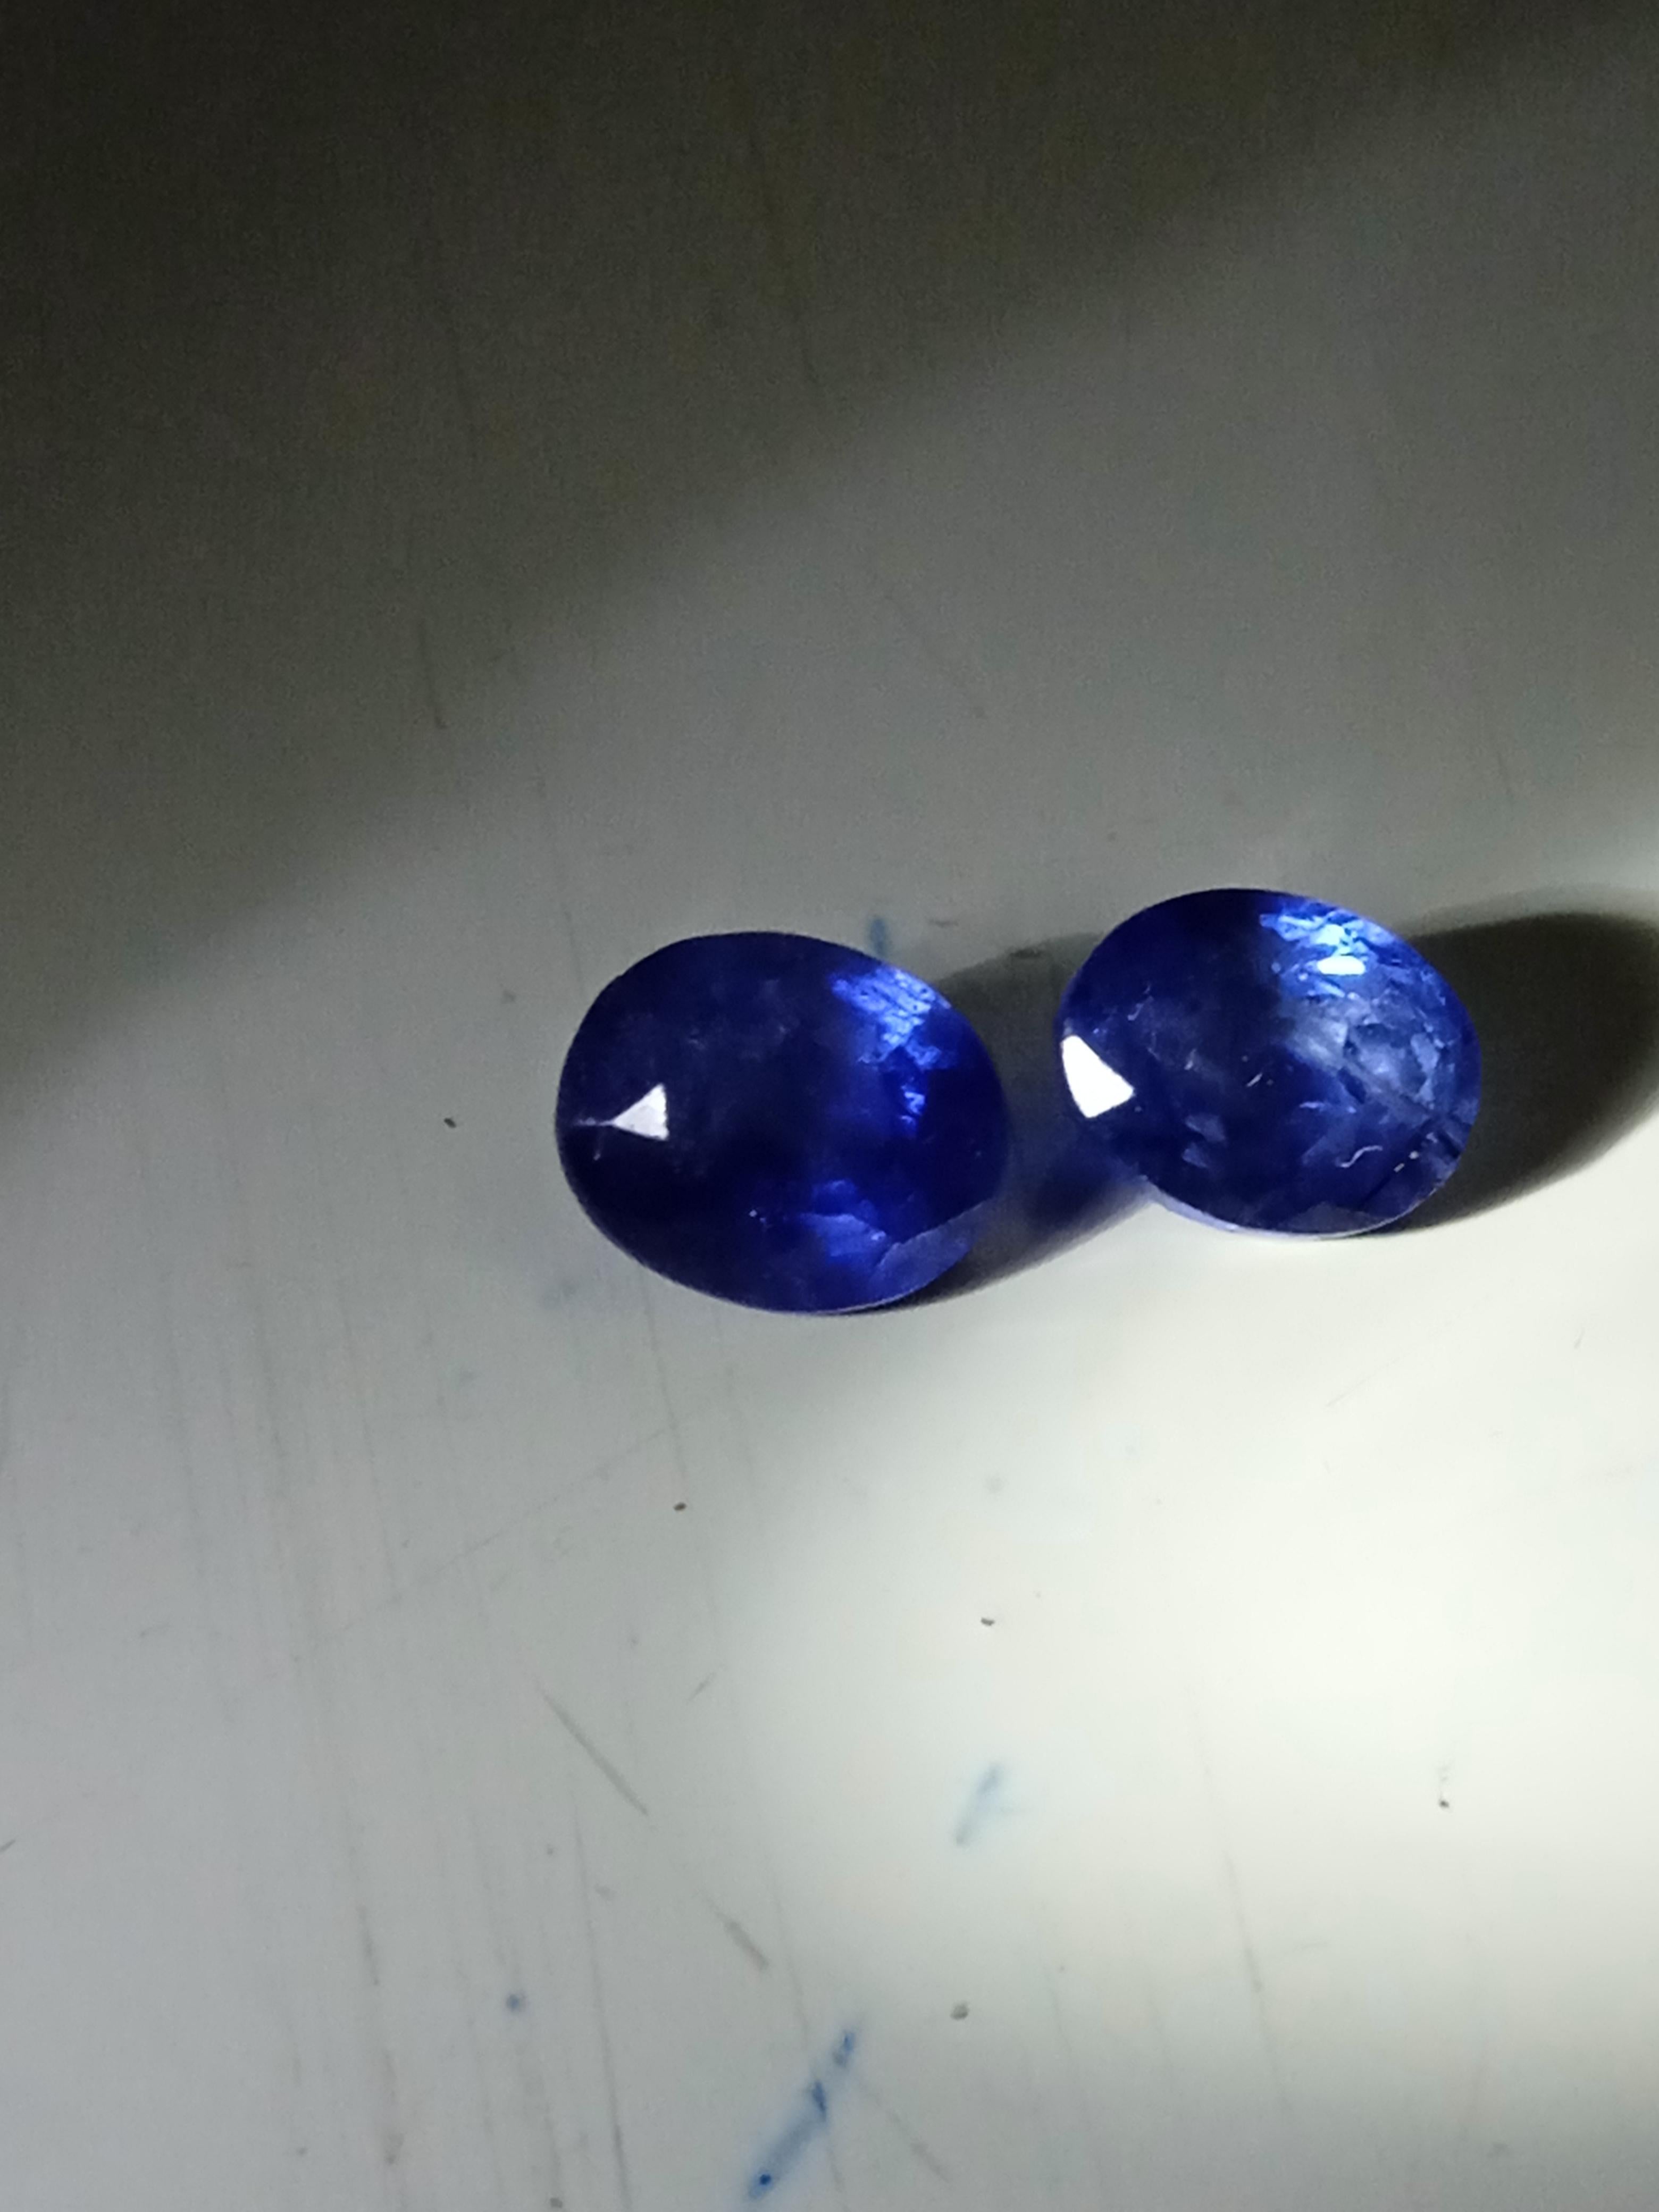 Ñatural Sri Lanka corn flower blue sapphires pair for your earrings not treated not heated 